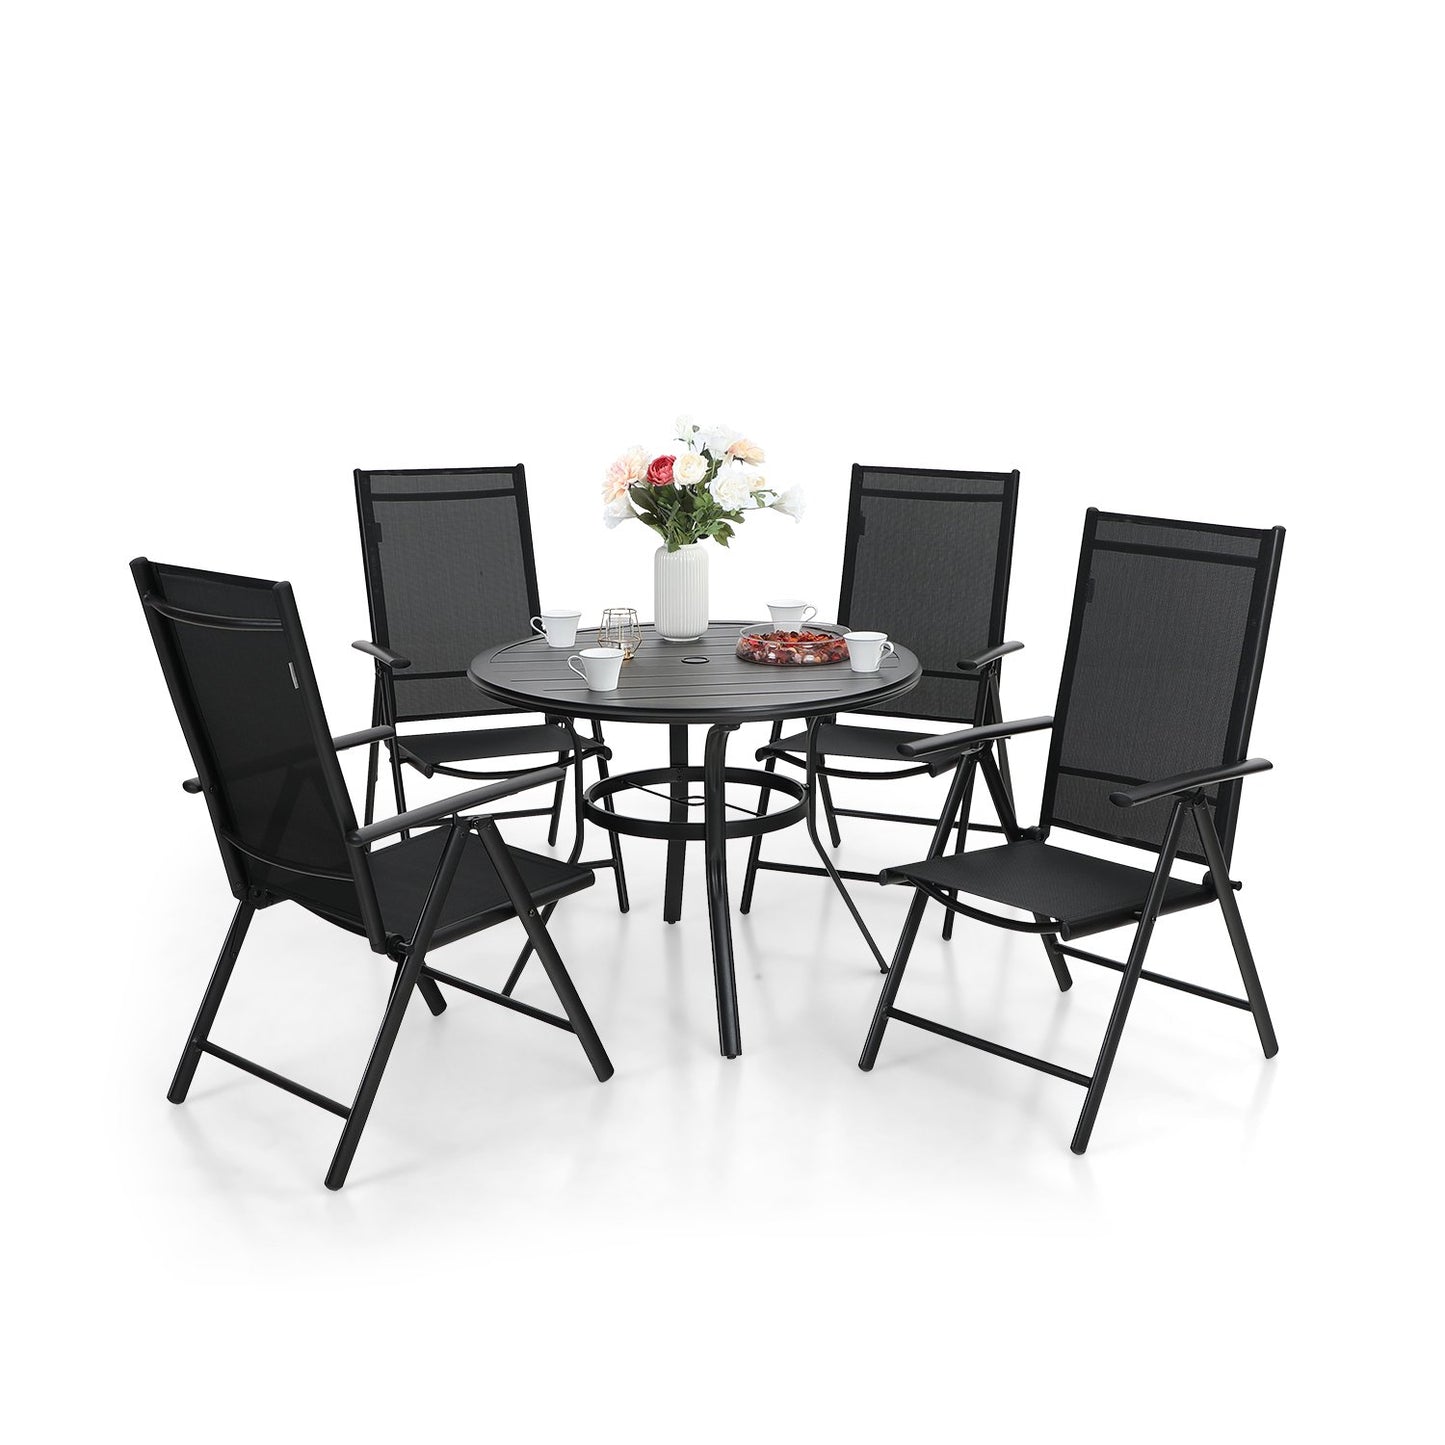 Sophia&William 5 Pcs Patio Dining Set Metal Table and Chairs Set for 4 People - Black